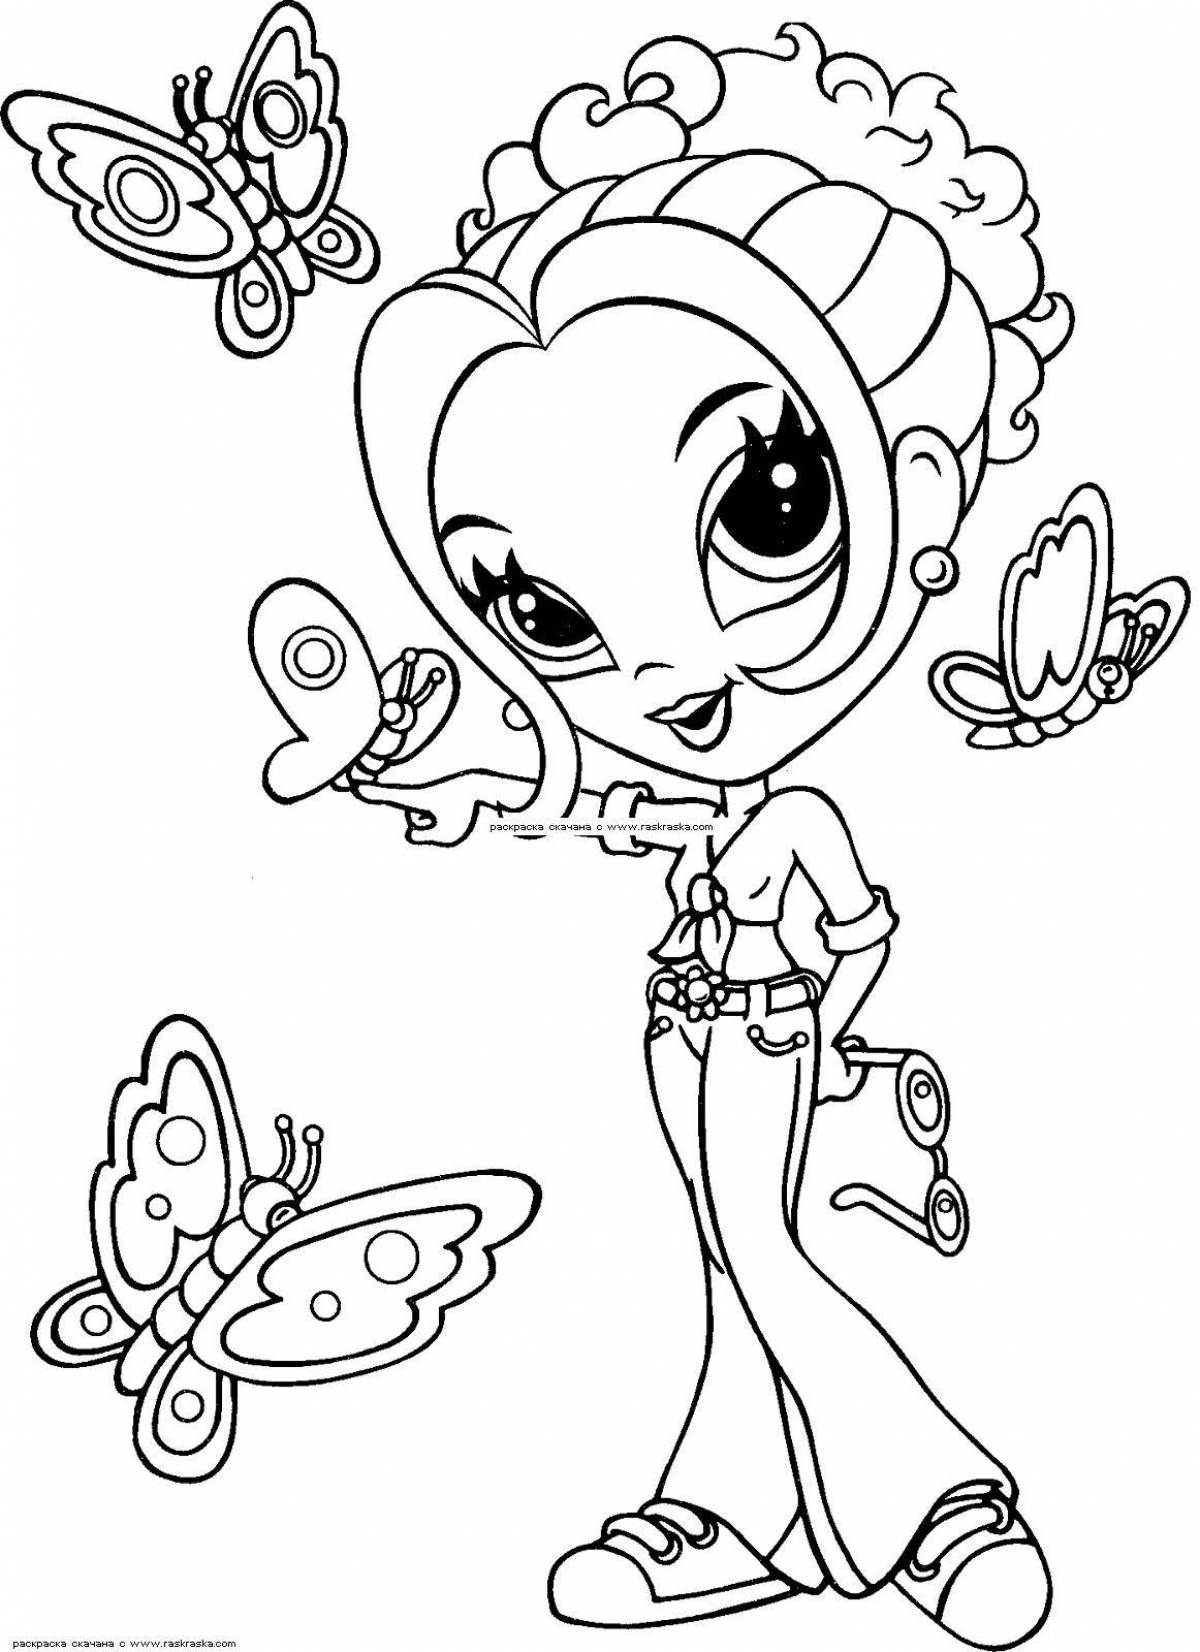 Cute coloring book for kids online